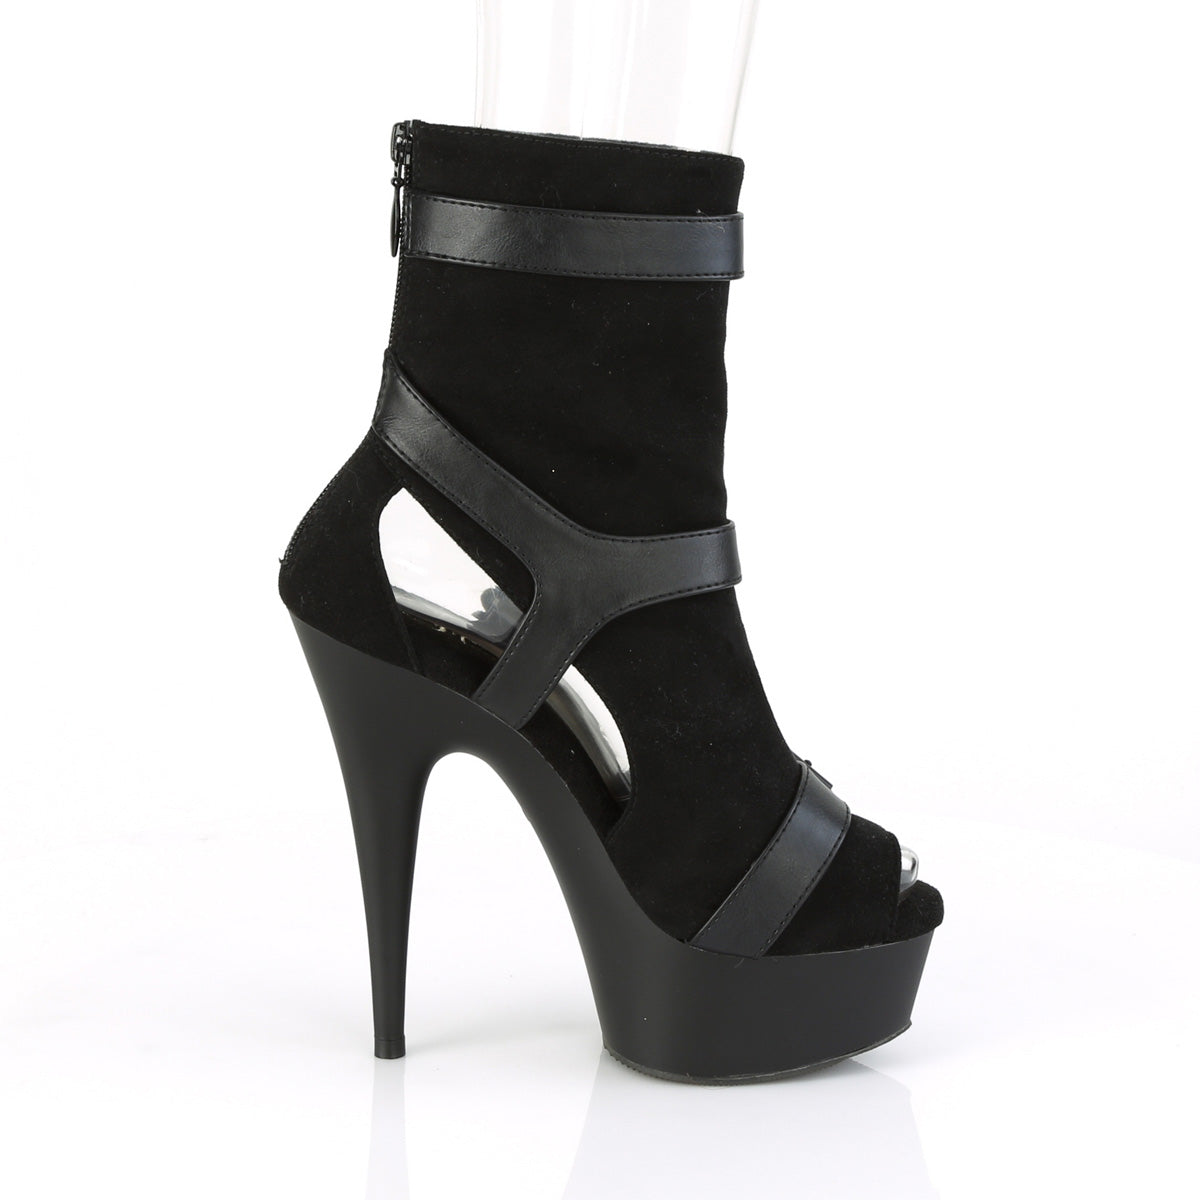 DELIGHT-1037 Pleaser Pole Dancing Shoes Ankle Boots Pleasers - Sexy Shoes Fetish Heels